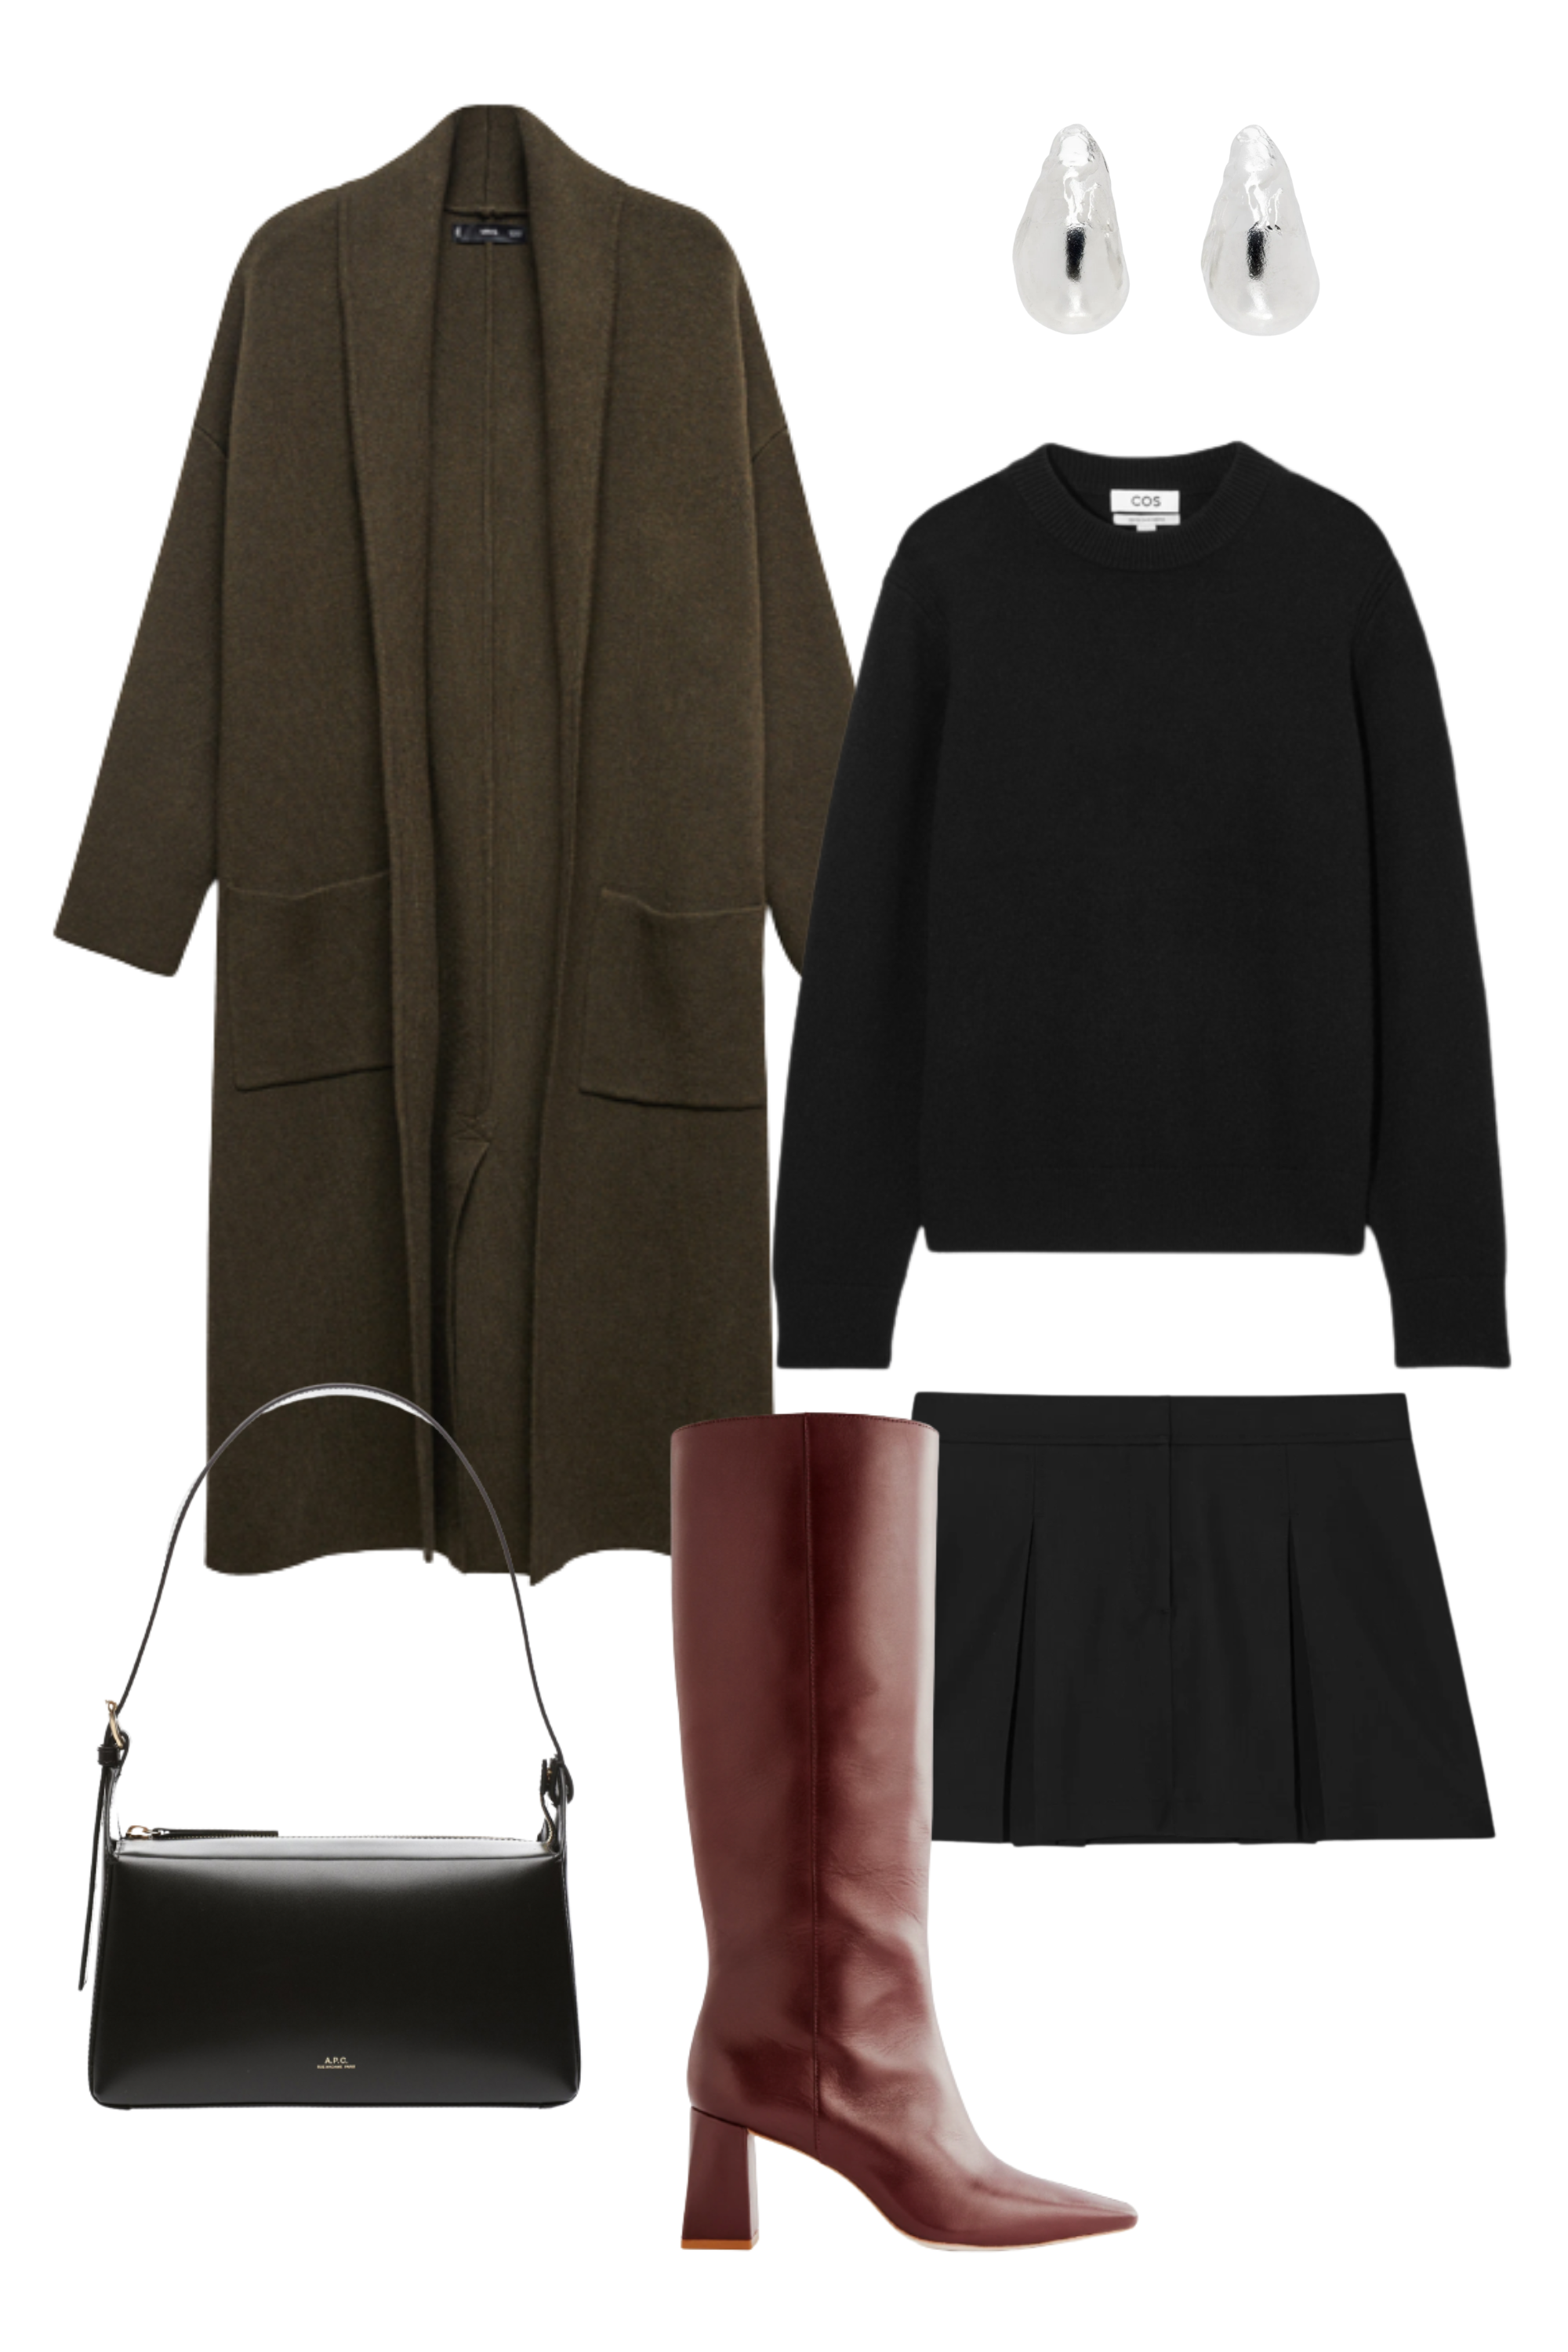 7 Fall Date Night Outfits that Exude Autumnal Romance